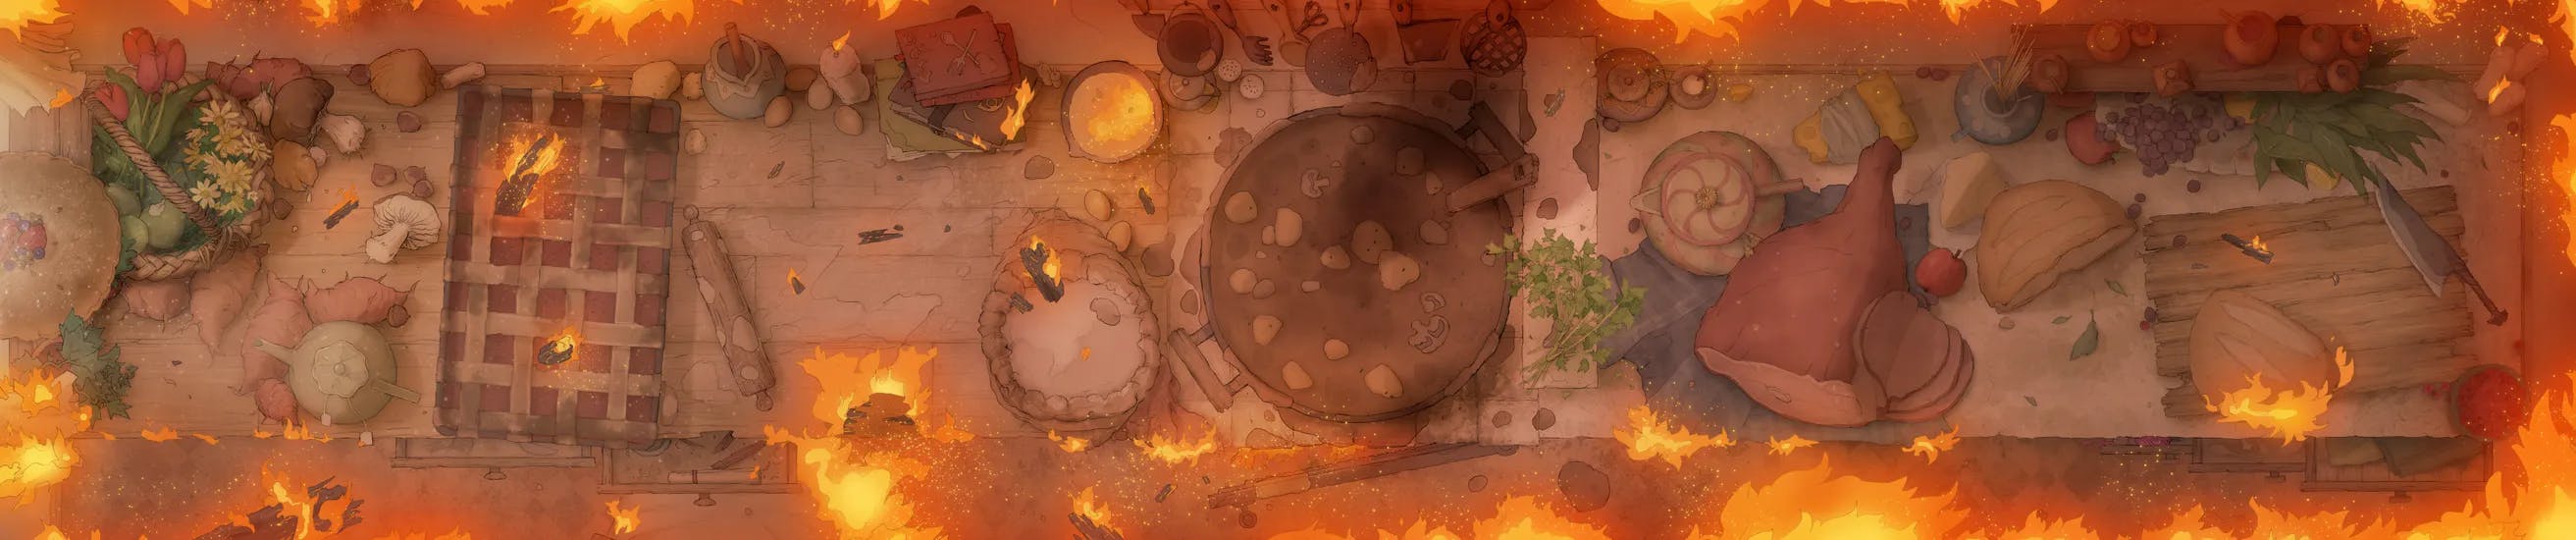 Giant Kitchen map, Fire variant thumbnail